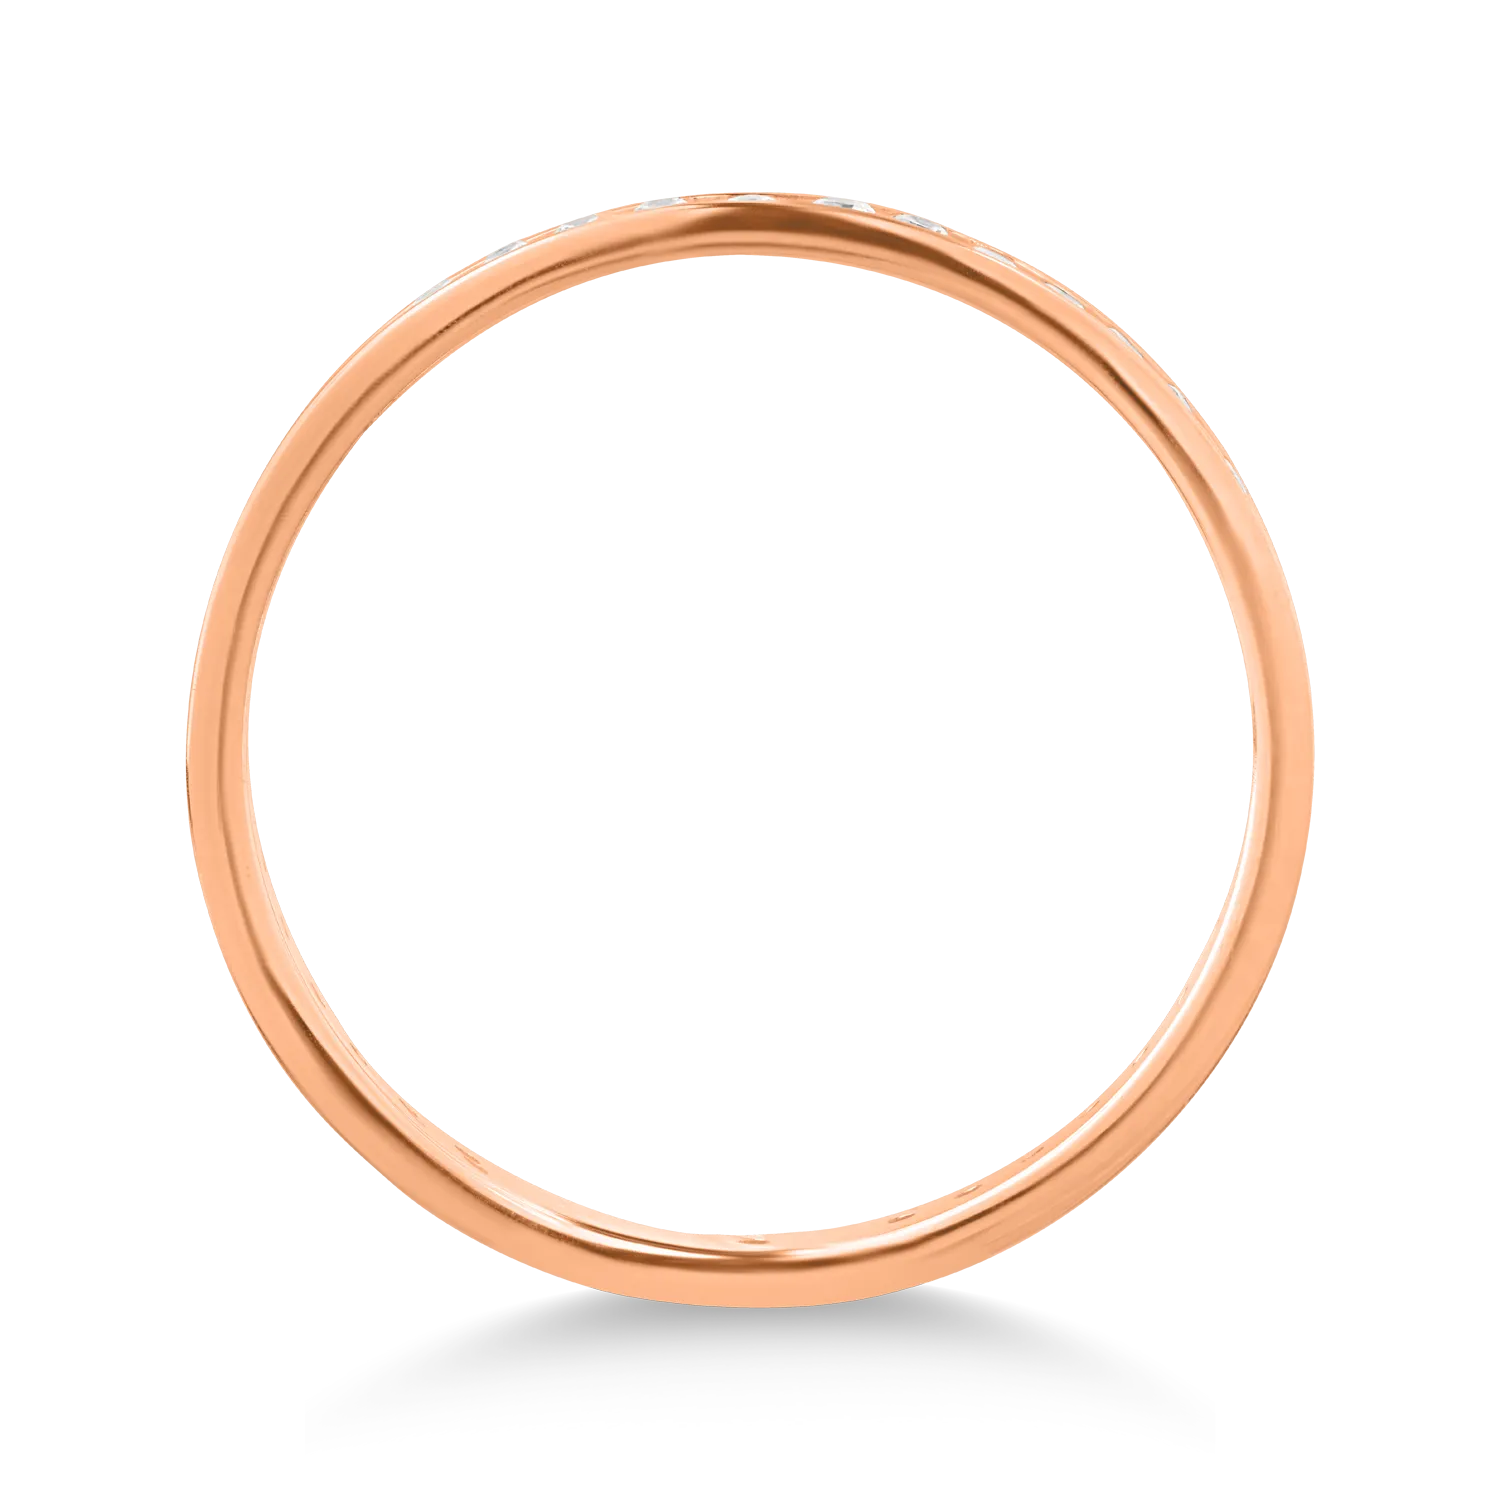 Eternity ring in rose gold